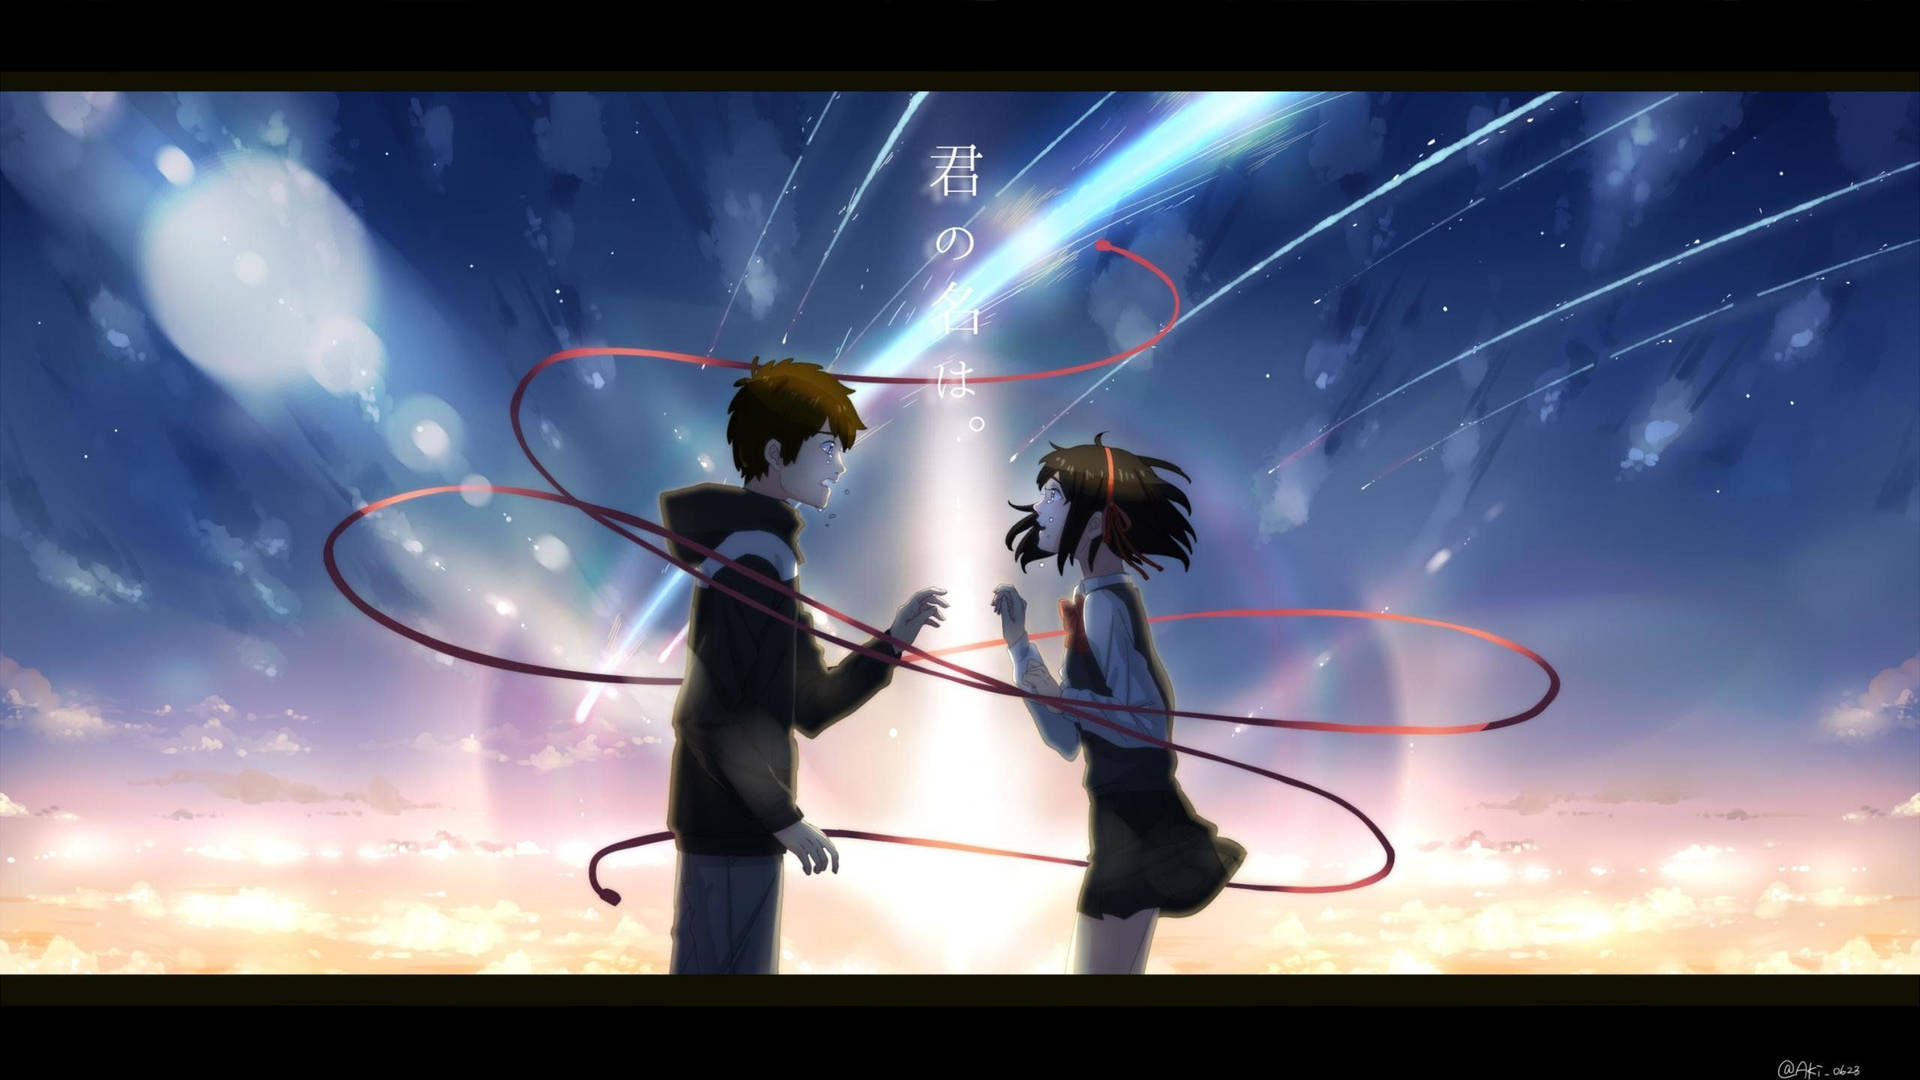 Taki and Mitsuha Look on in Wonder at the Red String of Fate Connecting Their Souls Wallpaper